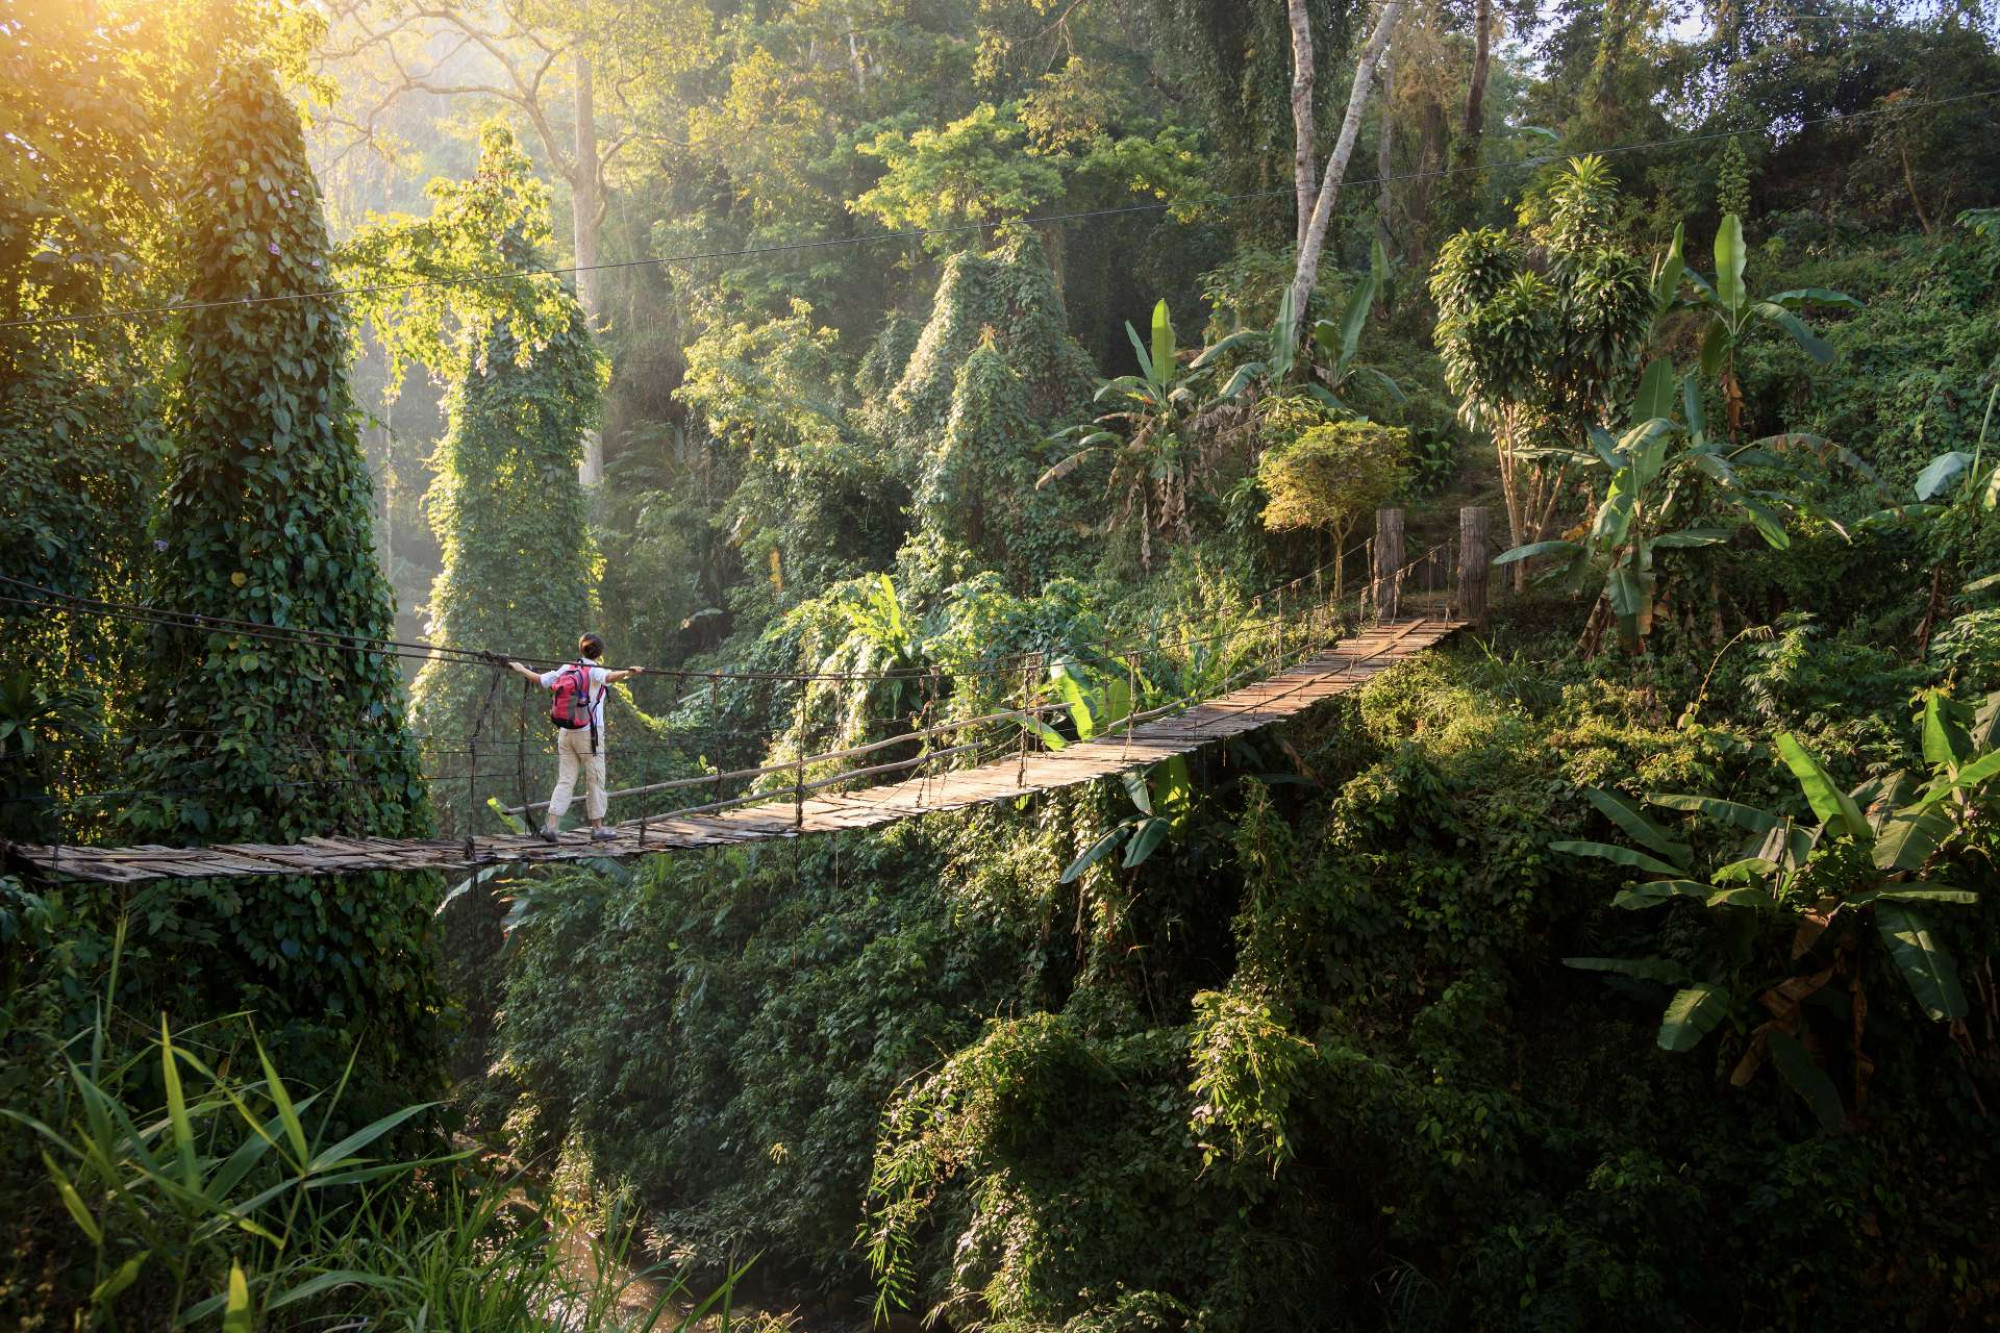 A backpacker crossing a rope bridge into the rainforest.